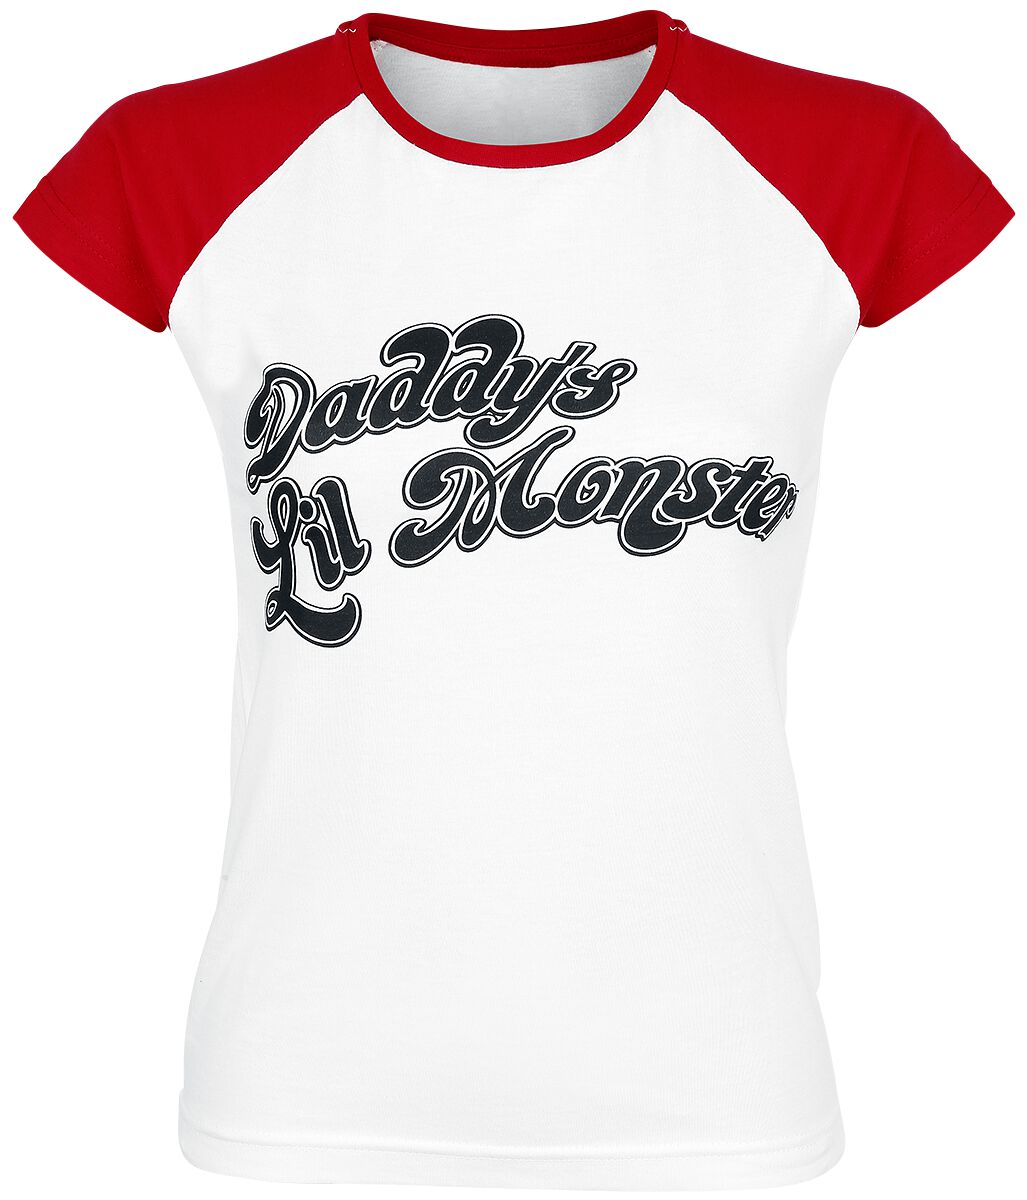 Suicide Squad Daddy's Lil' Monster T-Shirt weiß rot in XXL von Suicide Squad